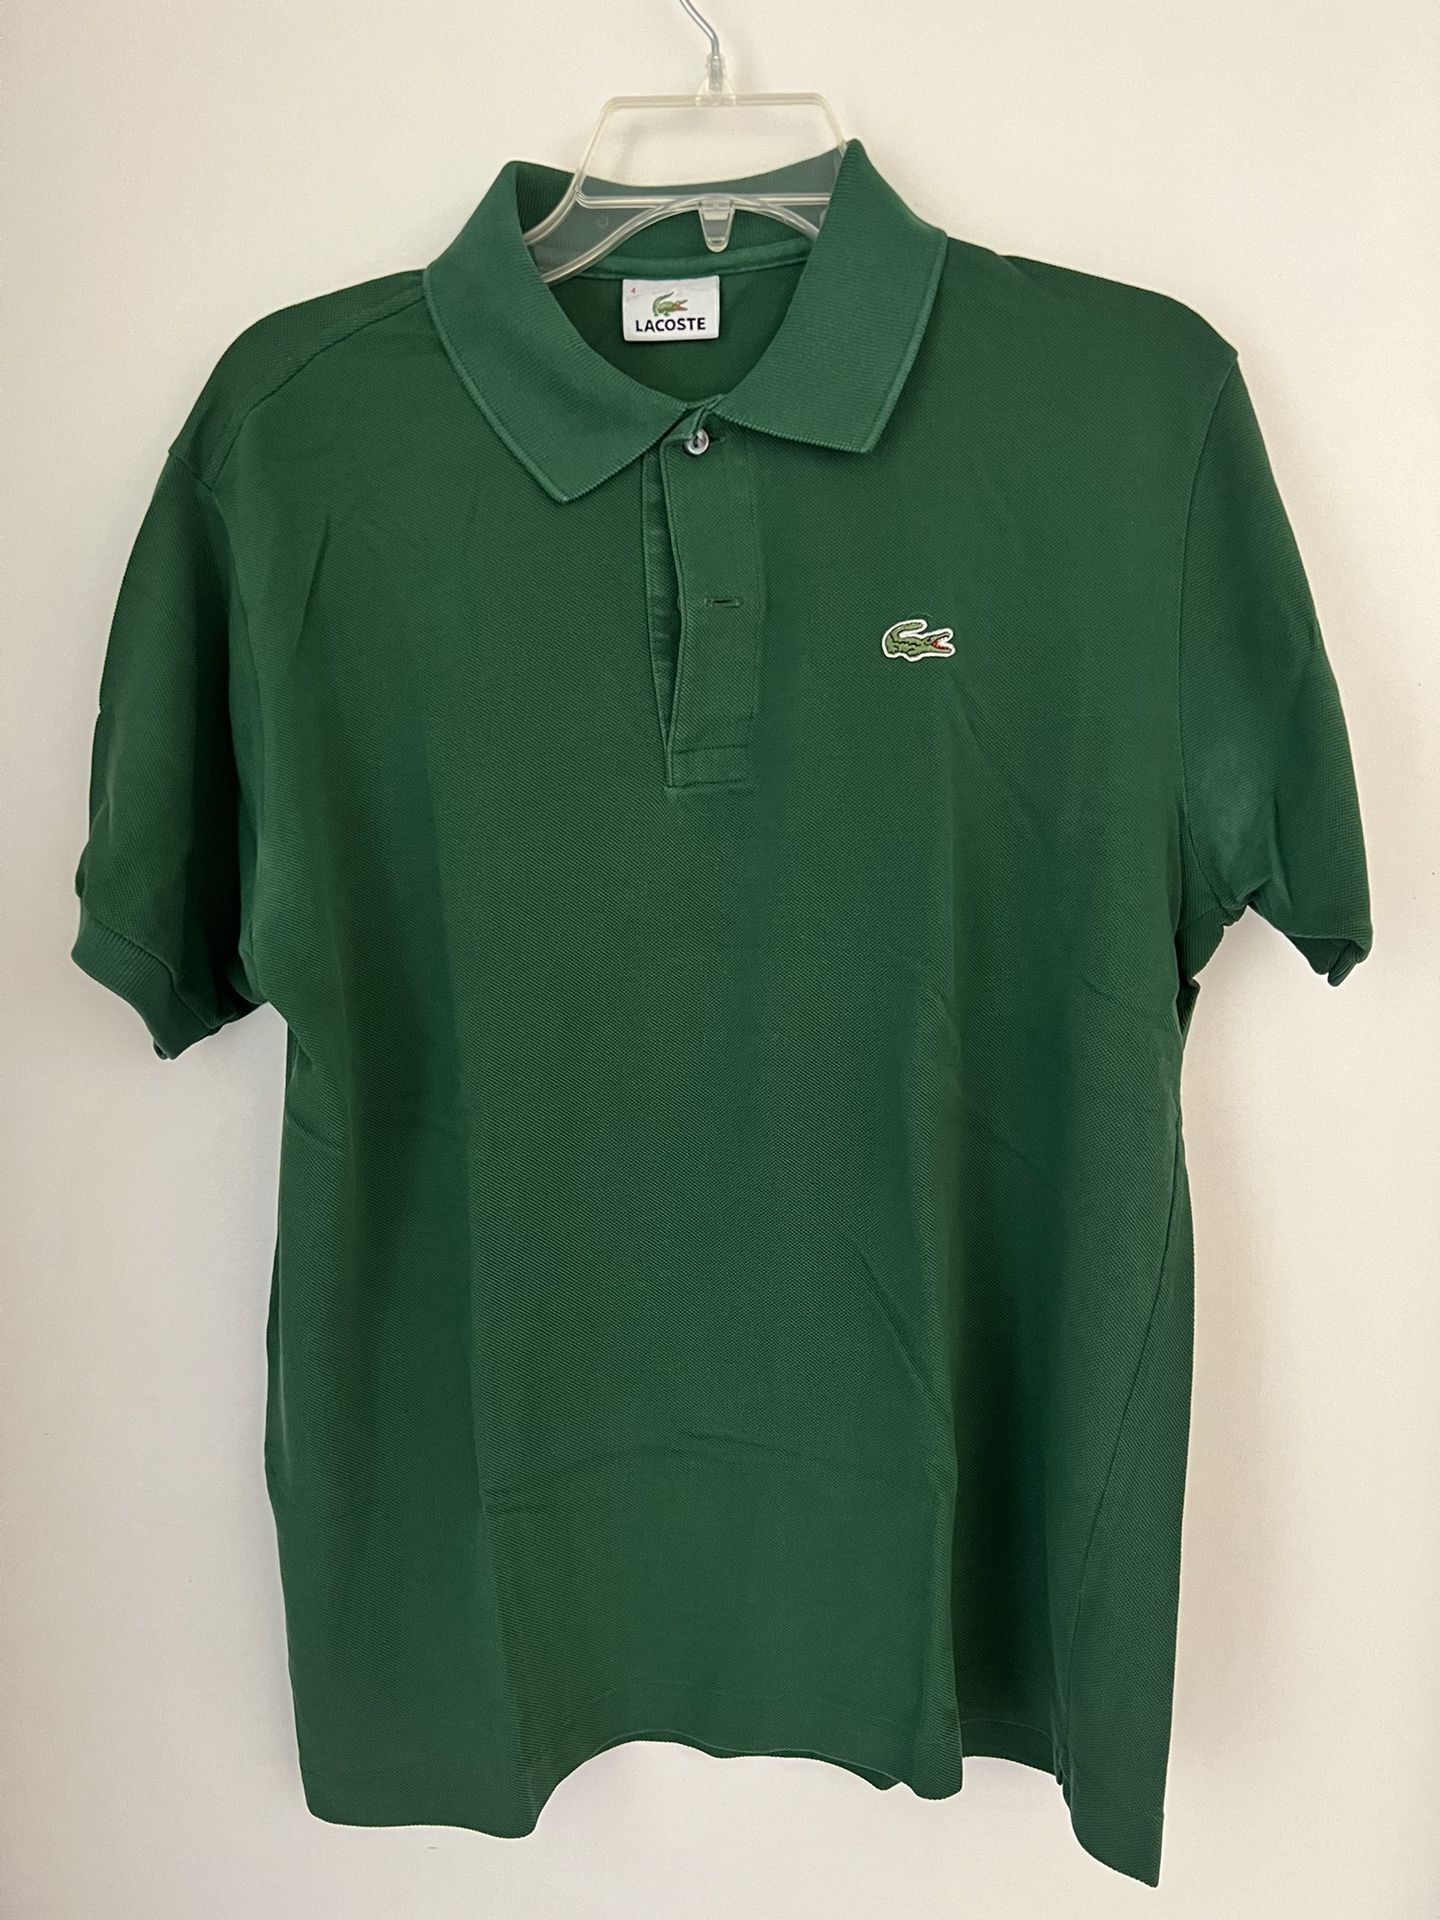 Lacoste Polo (size: 4 (M), color: Green) for Sale in Dana Point, - OfferUp